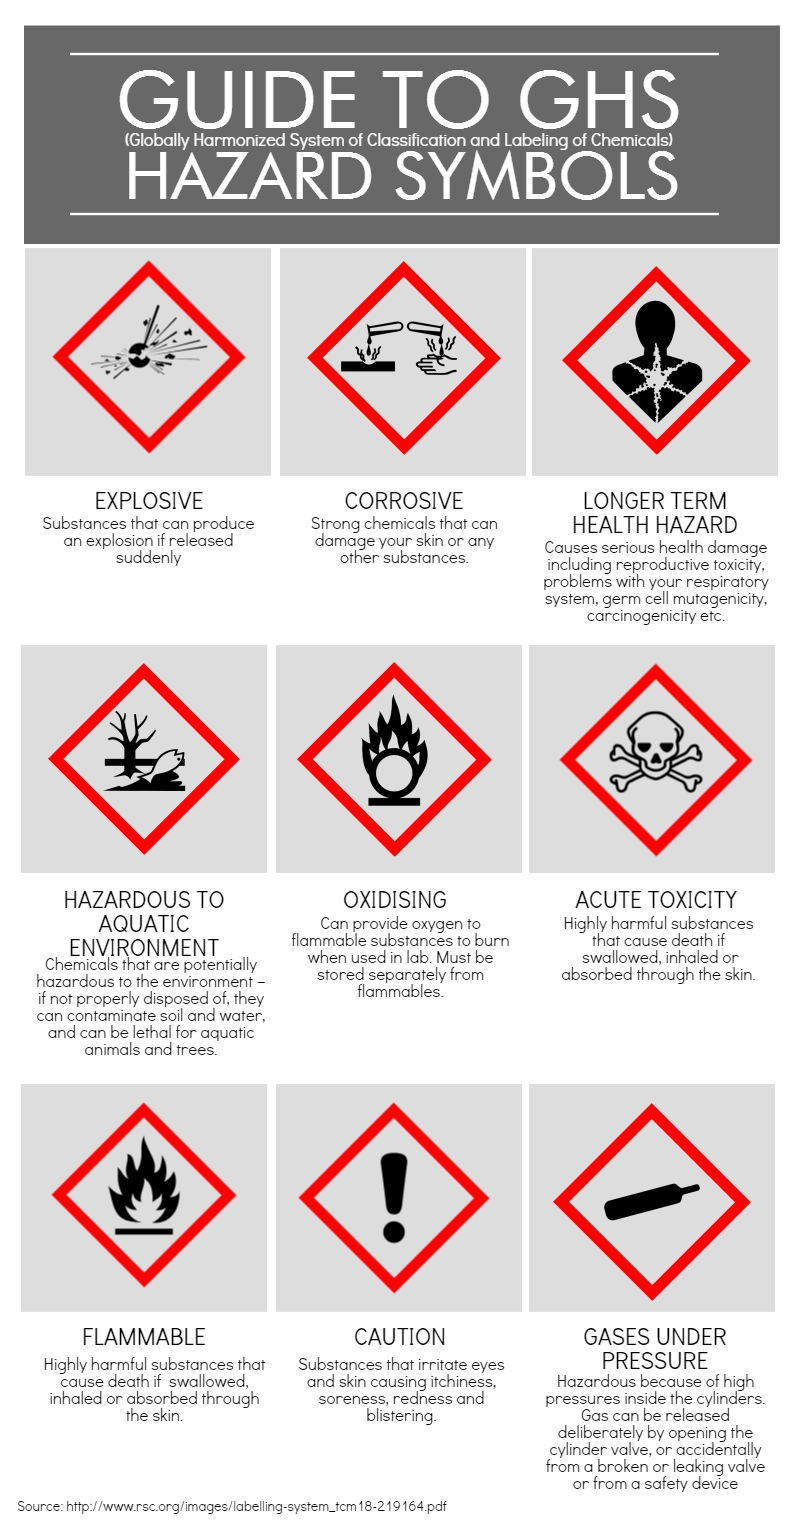 List Of Laboratory Safety Symbols And Their Meanings - Design Talk